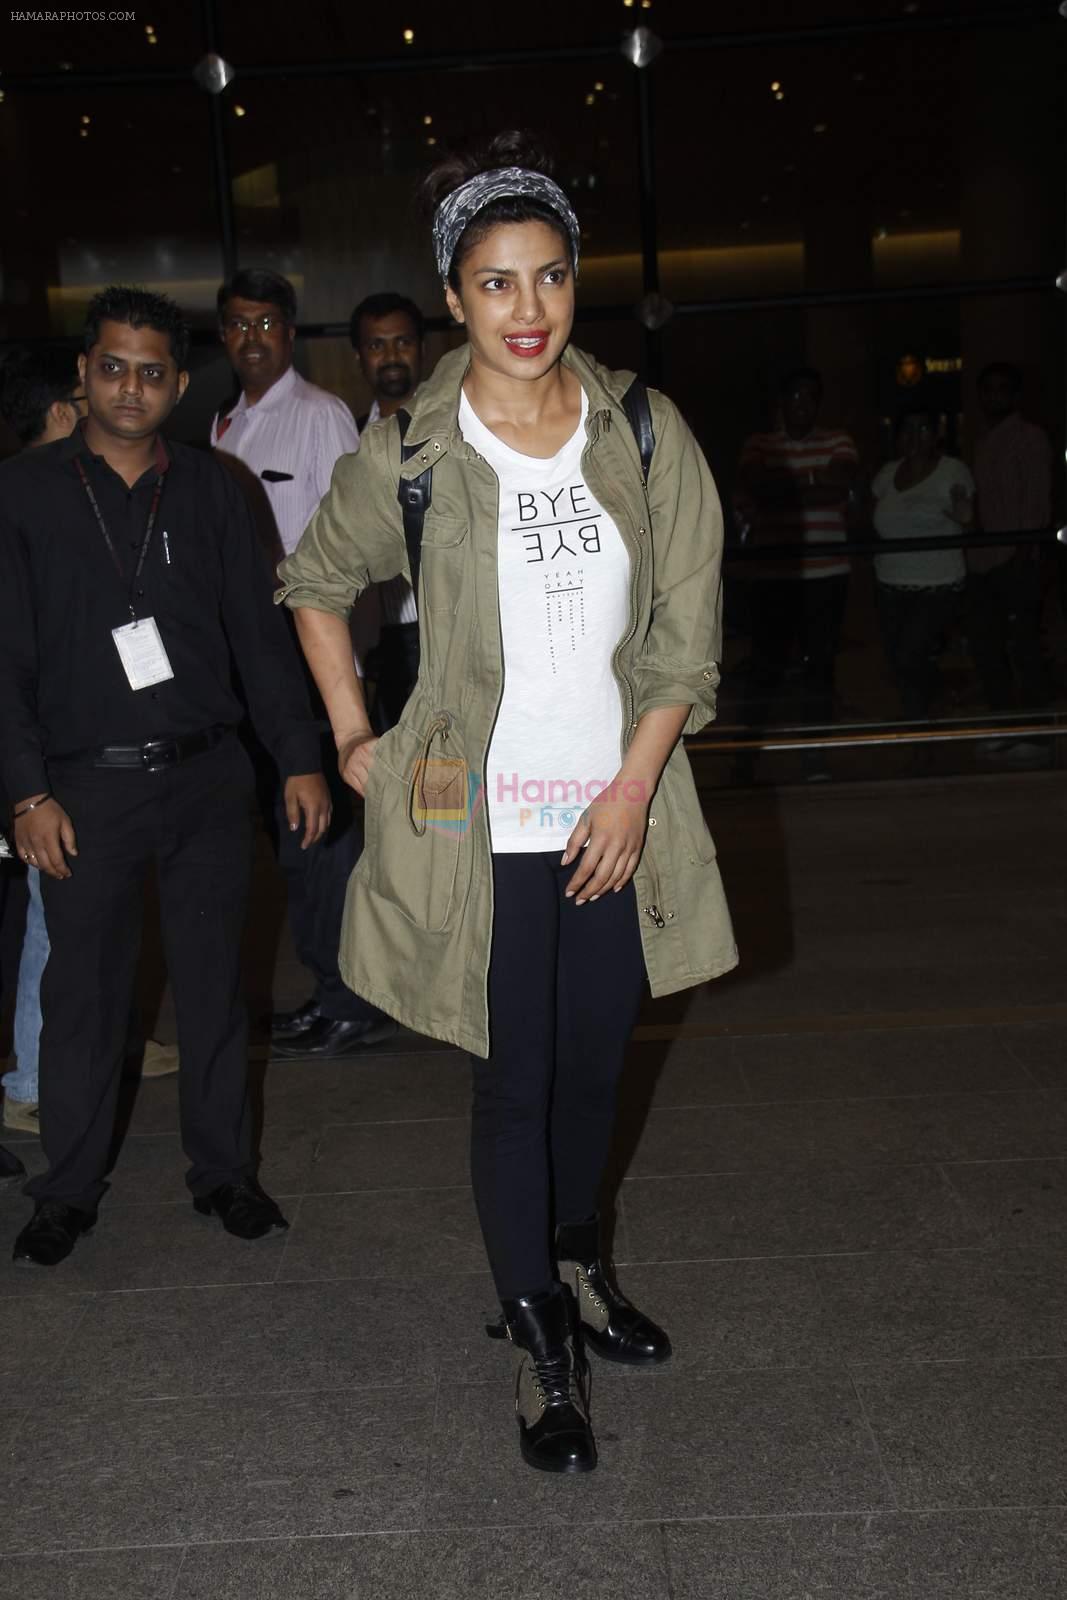 priyanka chopra returns from quantico schedule from Montre on 4th Sept 2015